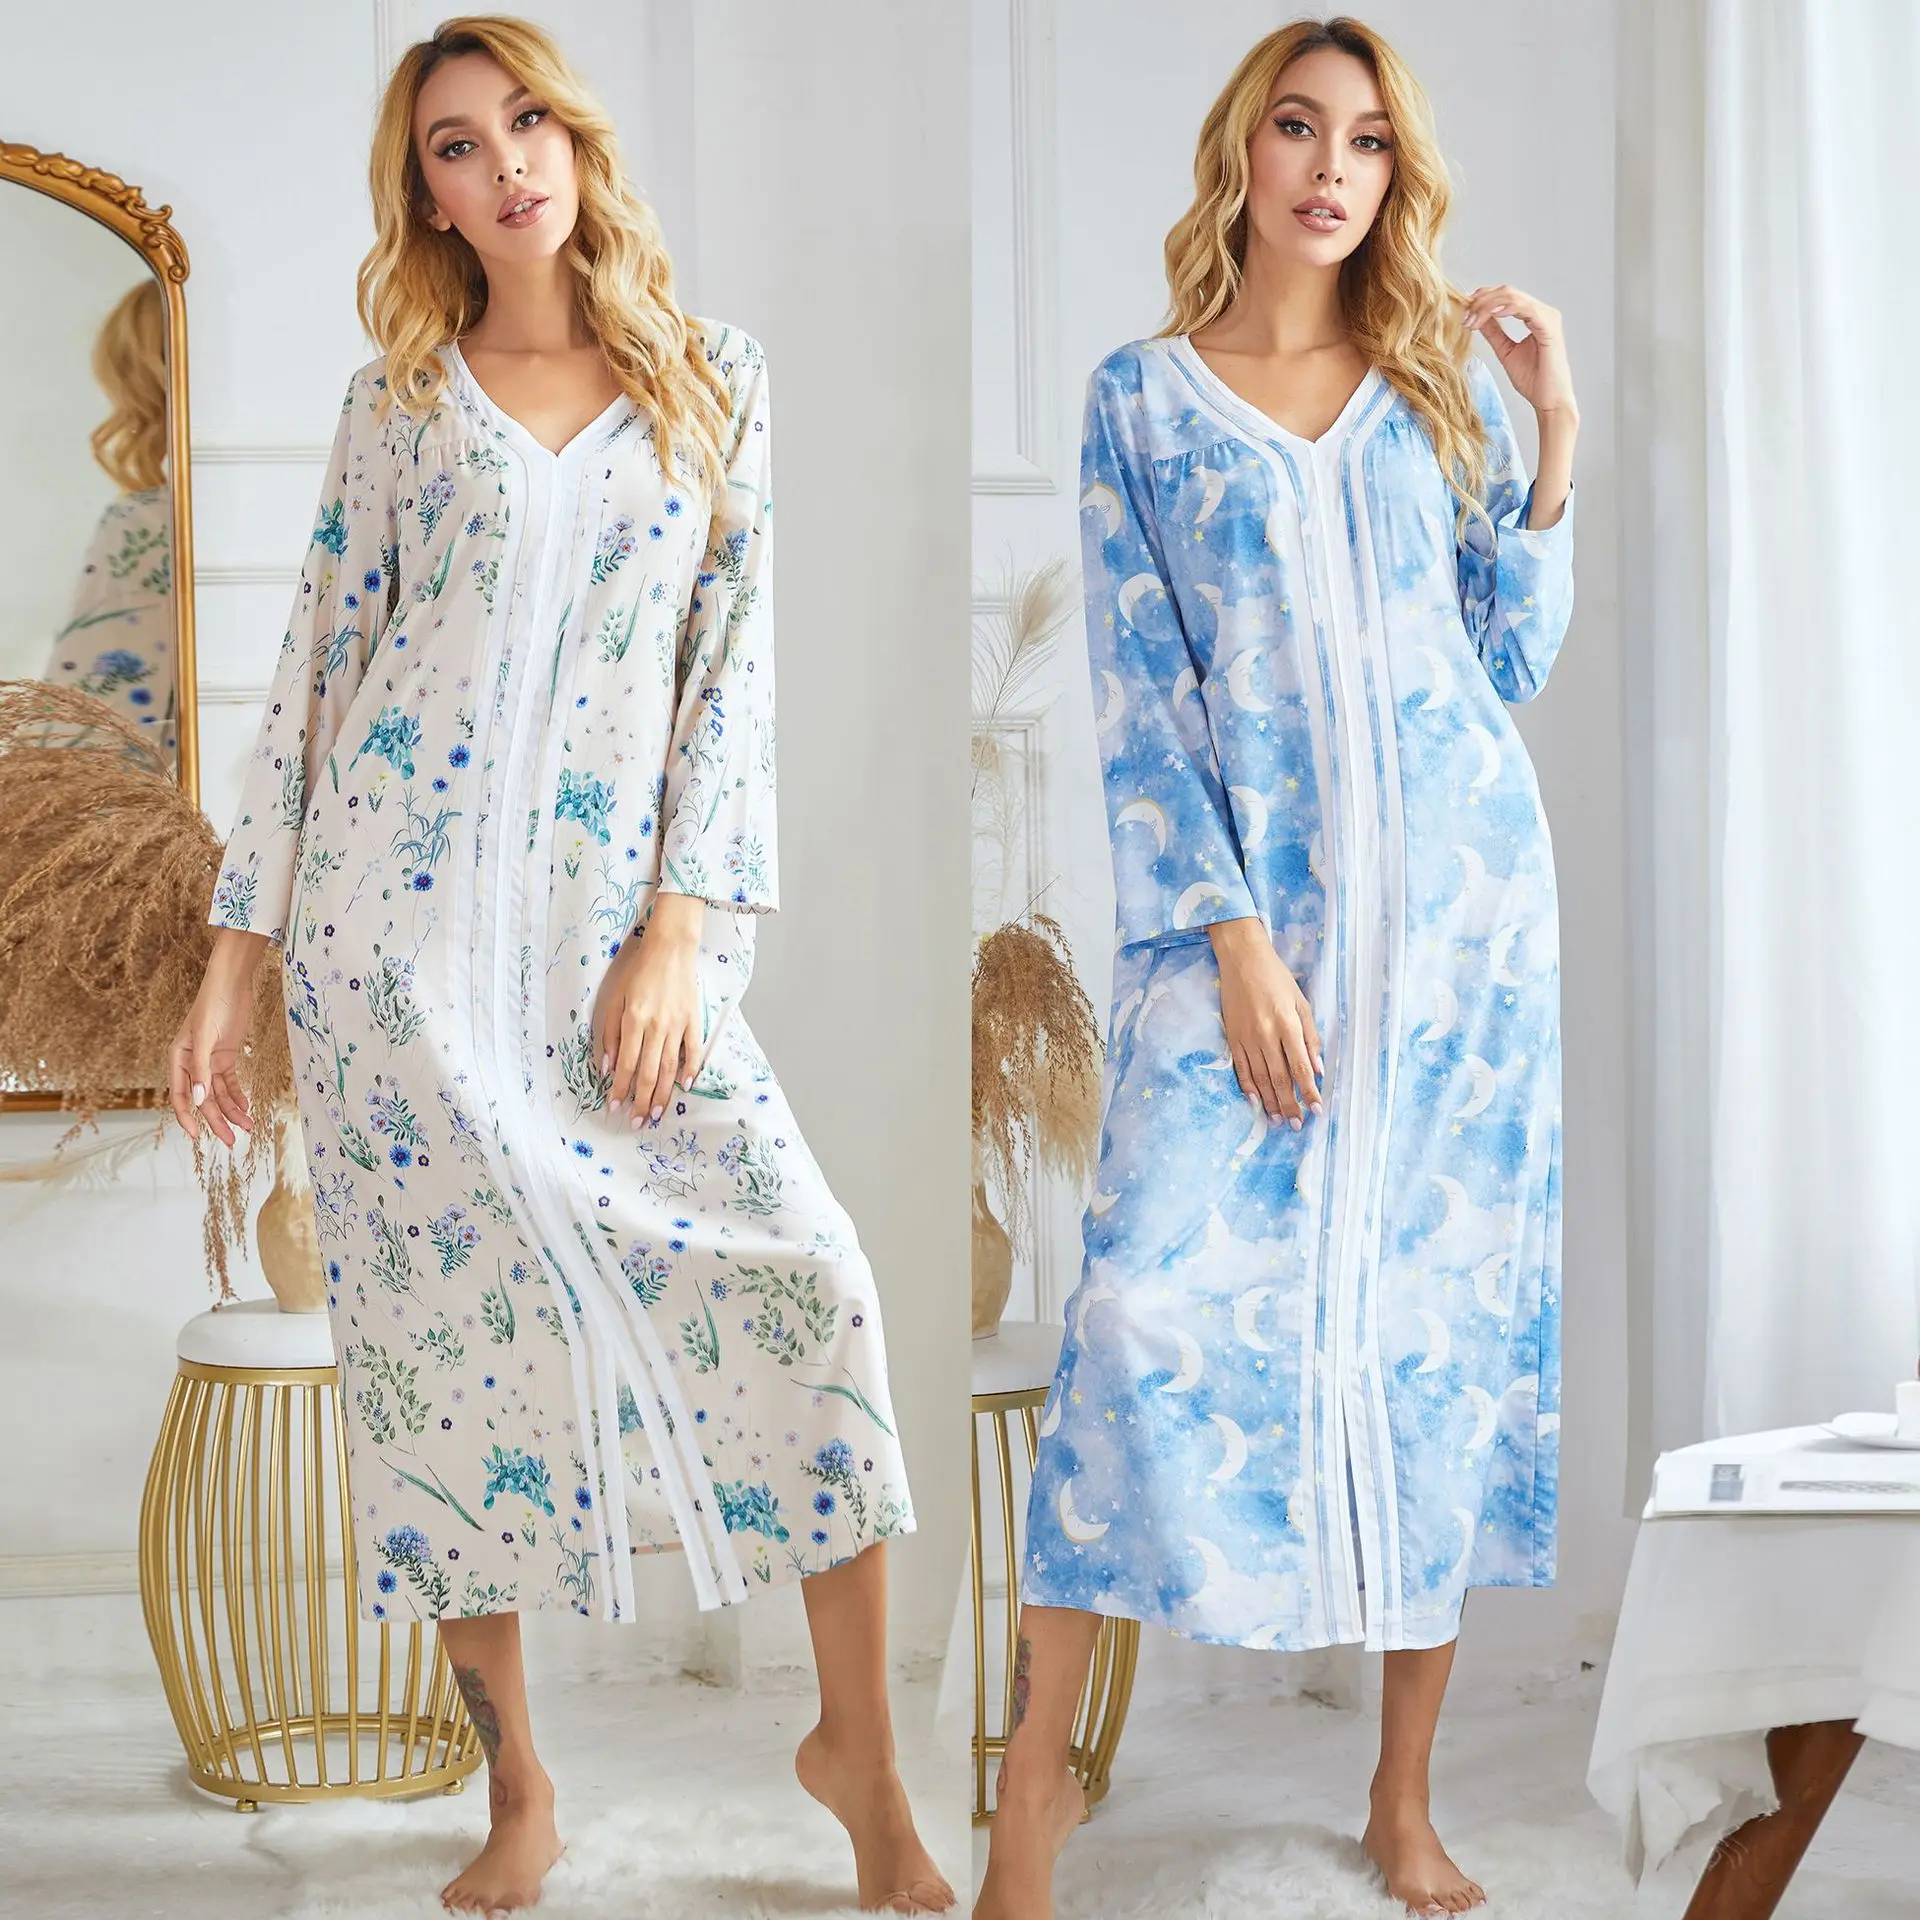 Autumn and Winter Hot Style Women's Nightdress Woven Four-way Stretch Printing Long-sleeved Long Home Wear Dress